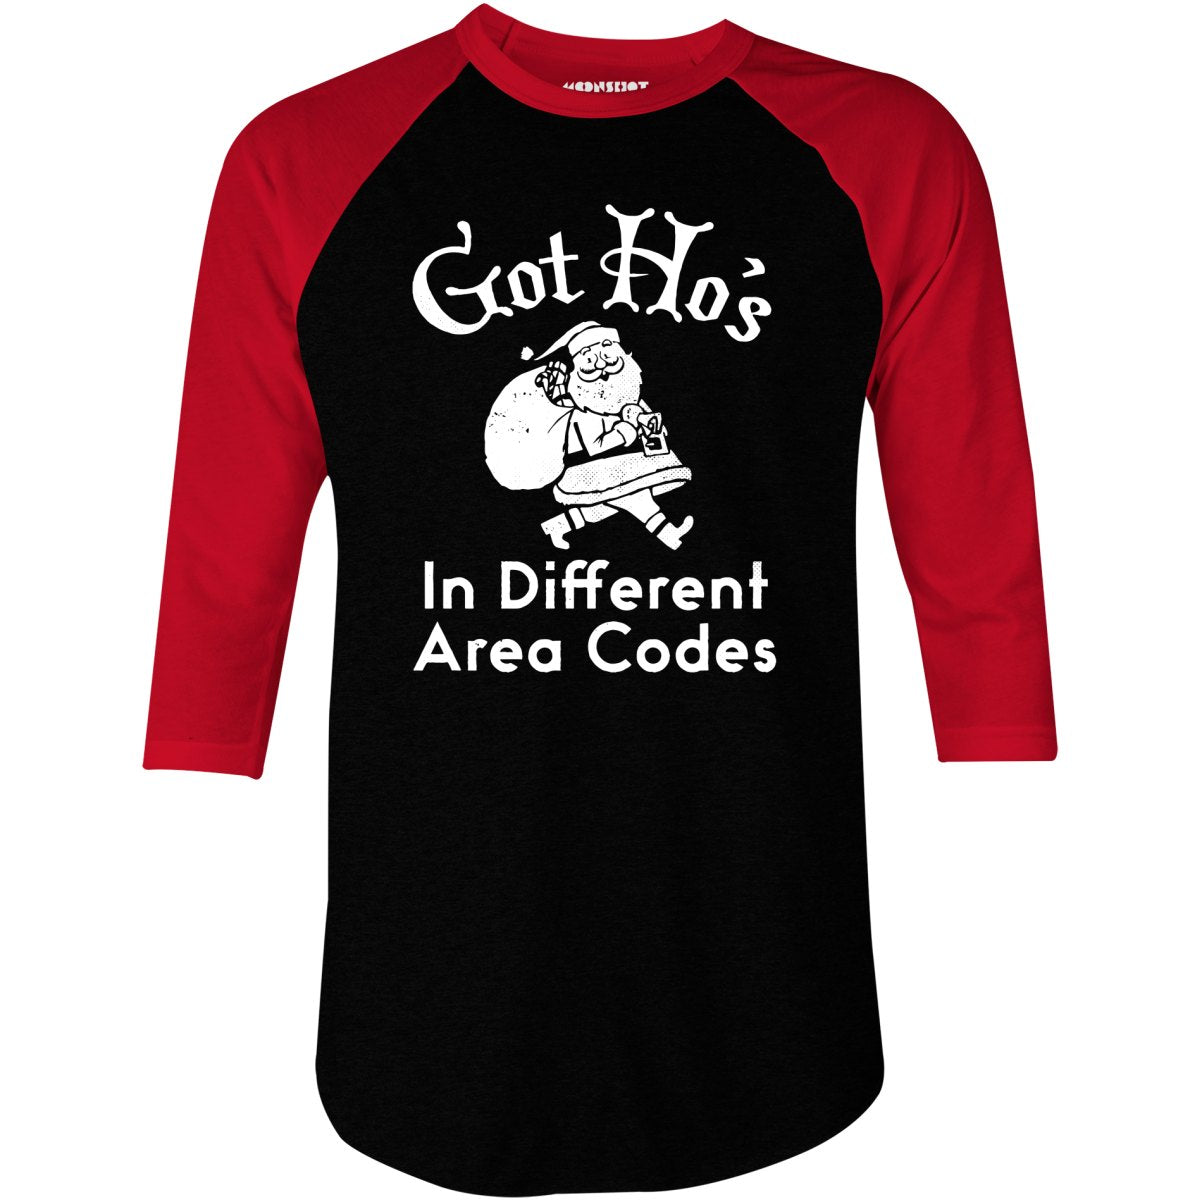 Got Ho's in Different Area Codes - 3/4 Sleeve Raglan T-Shirt